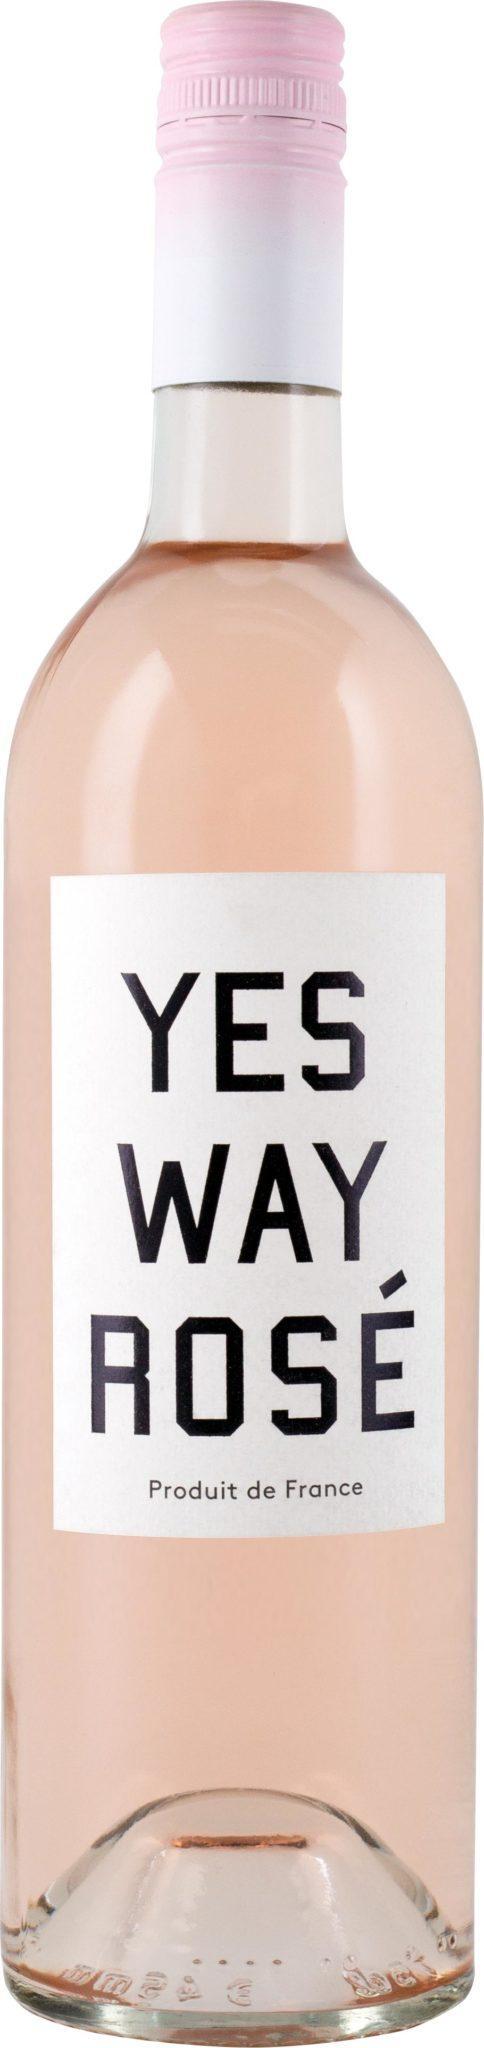 images/wine/ROSE and CHAMPAGNE/Yes Way Rose.jpg